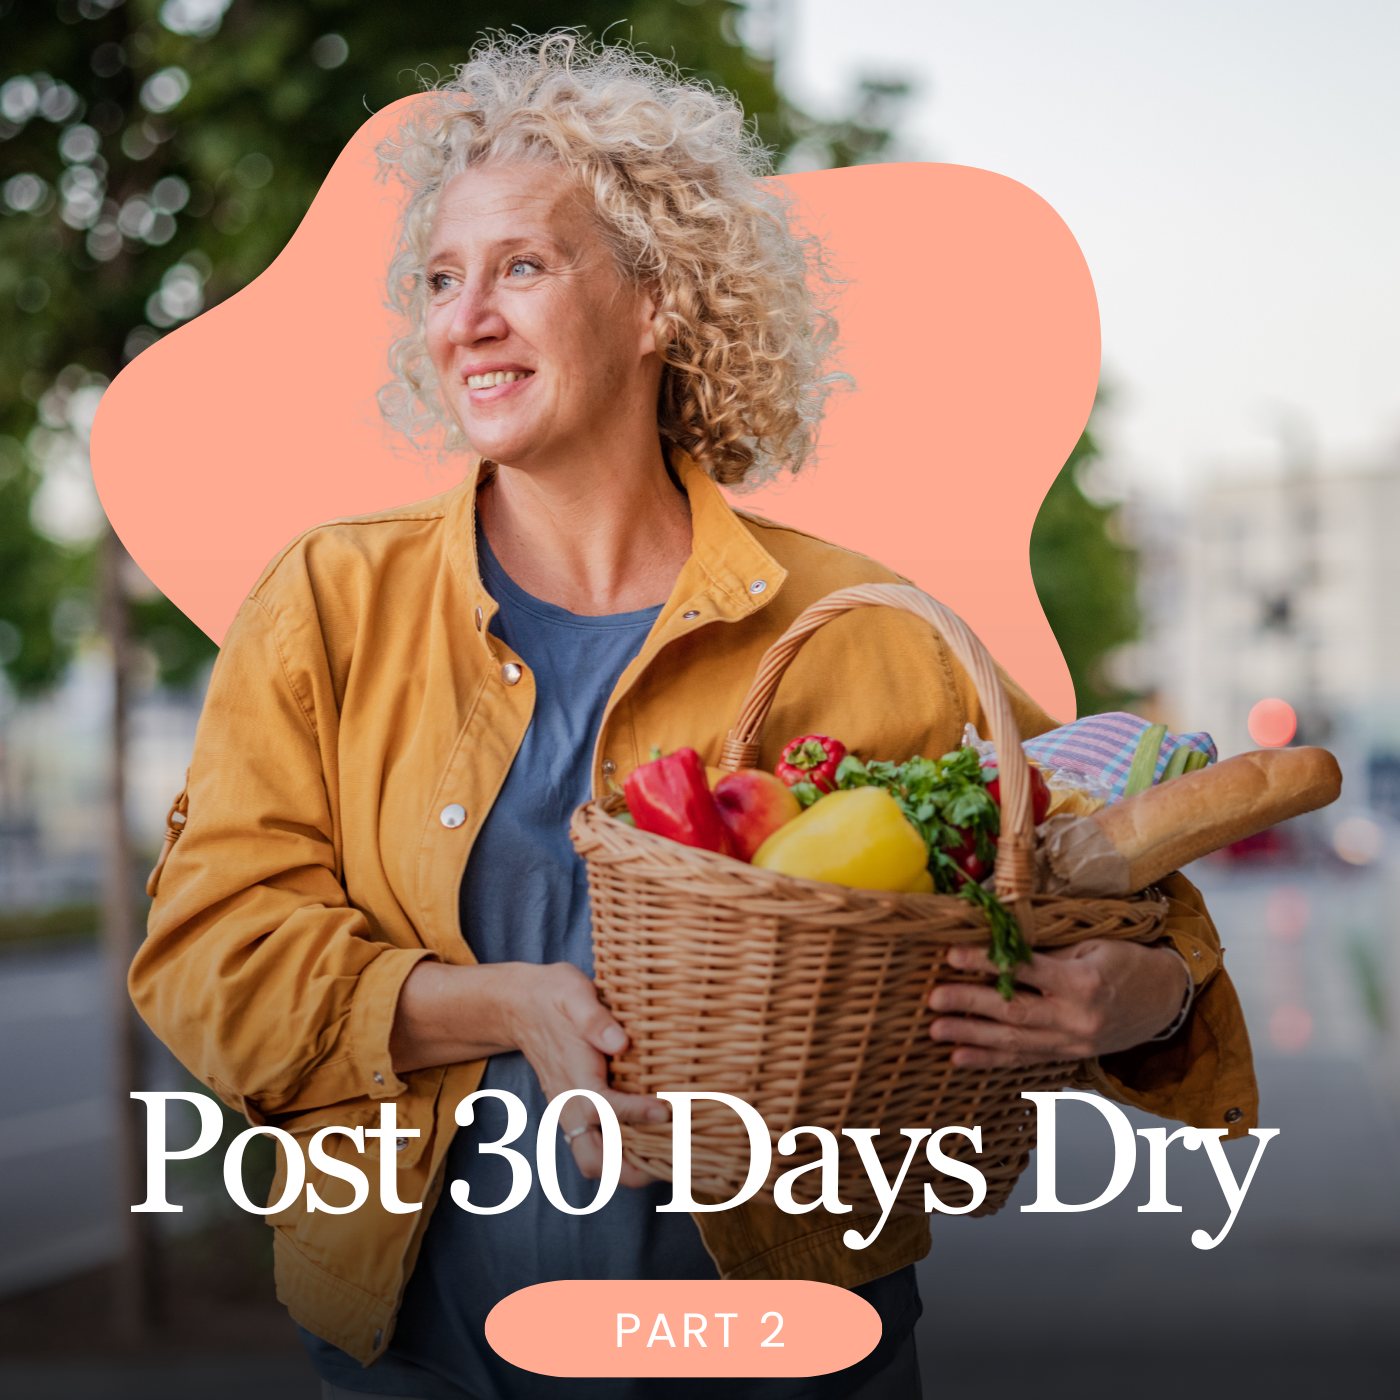 Post 30 Days Dry Wellness Continued